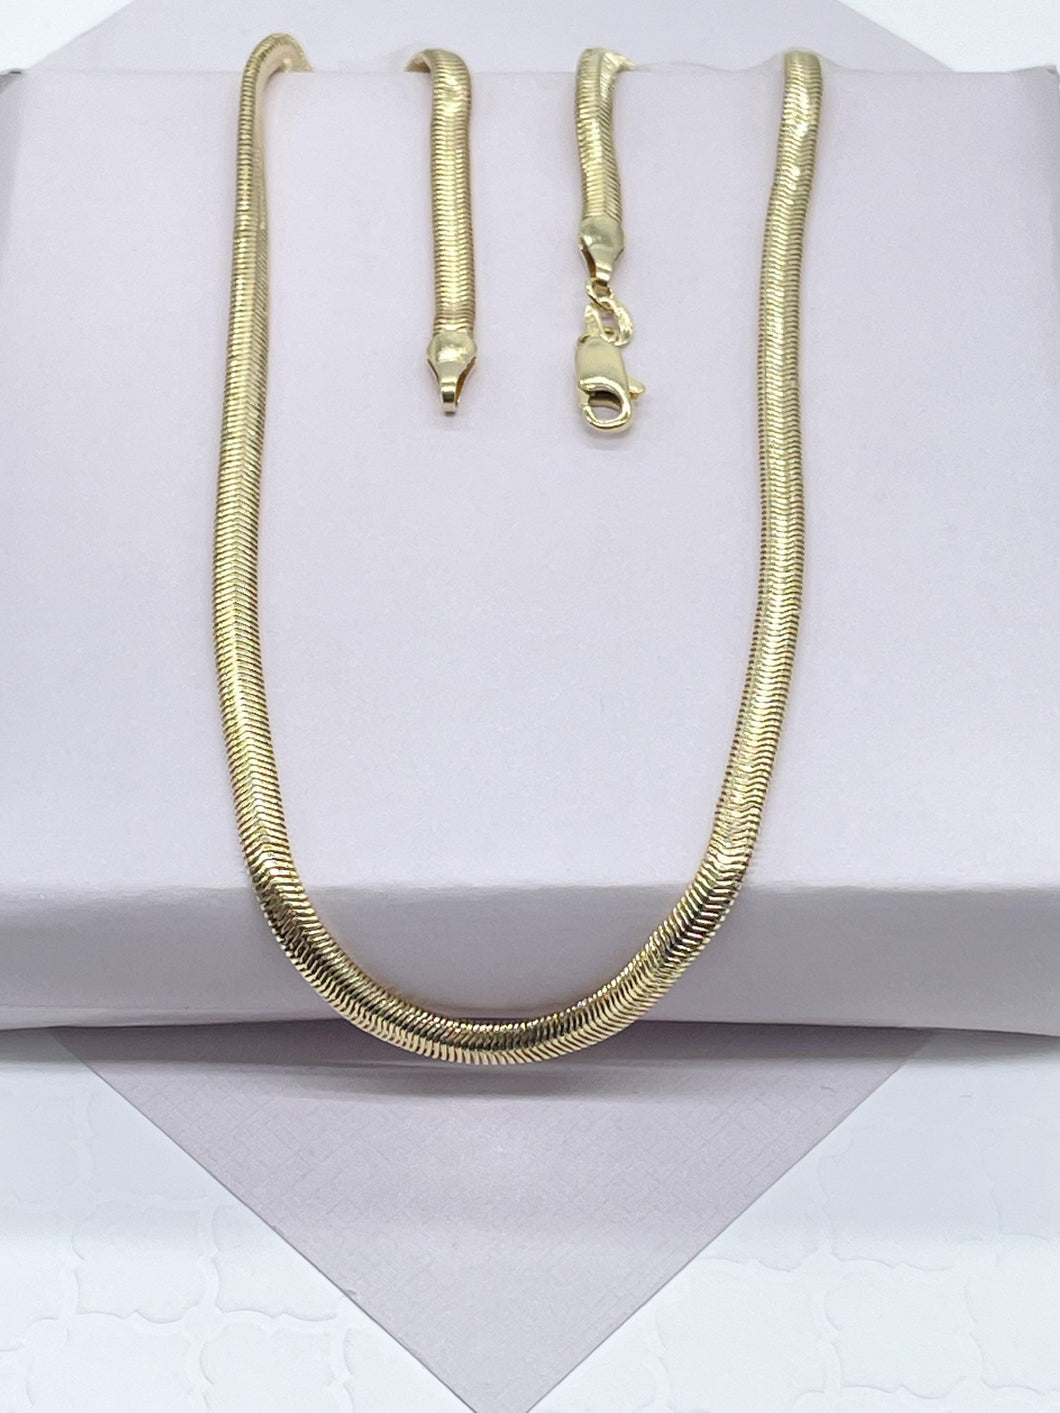 18k Gold Filled Soft Flat Snake Chain For Wholesale Jewelry Making Supplies